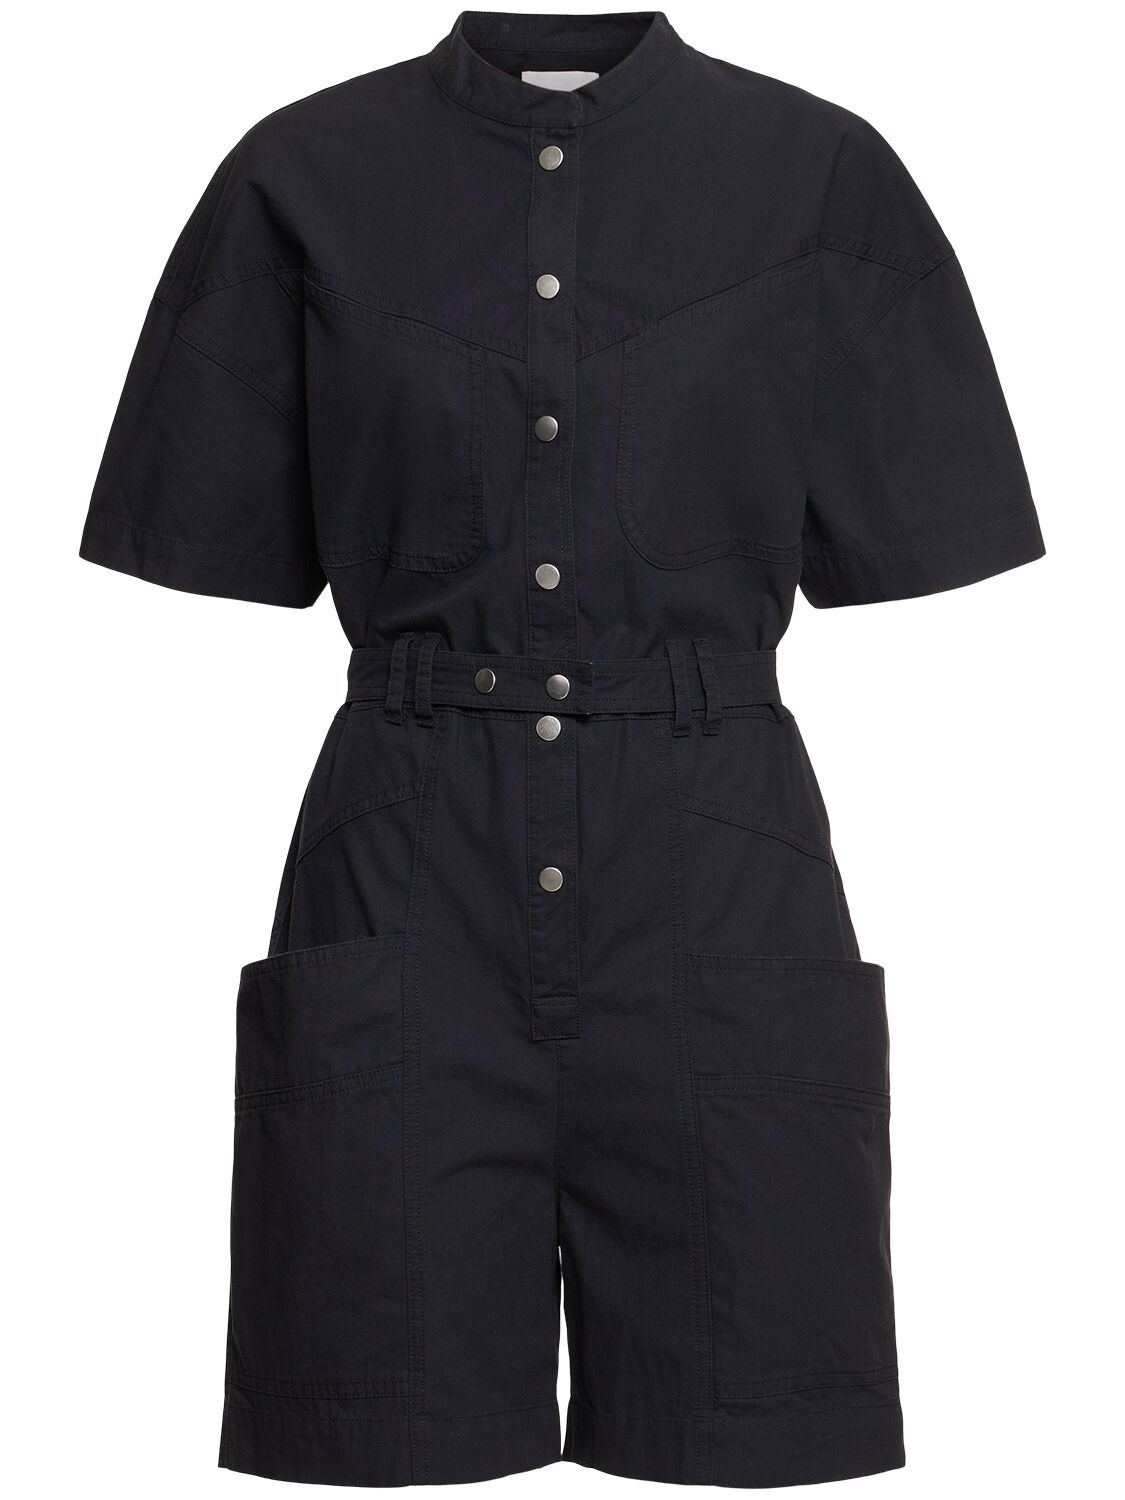 Kiara Belted Cotton Overalls